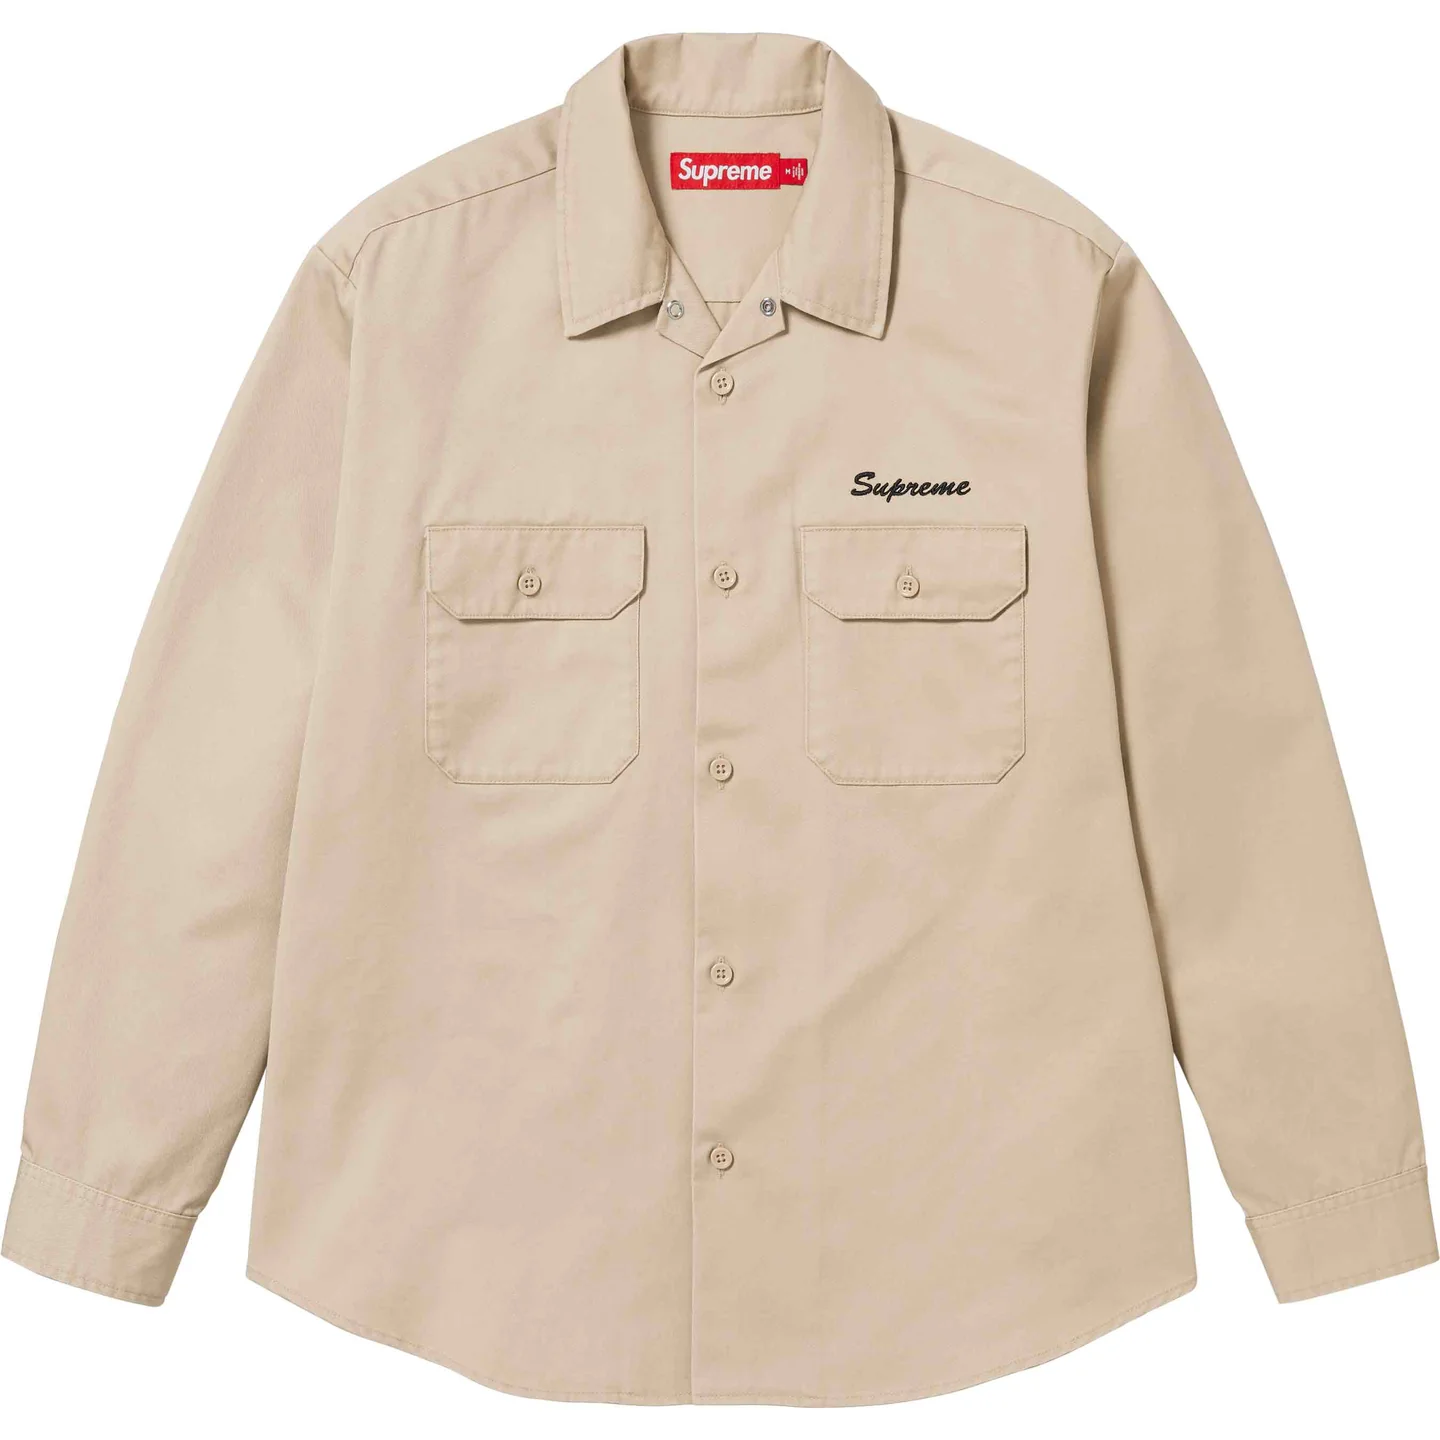 Our Lady Work Shirt | Supreme 24ss